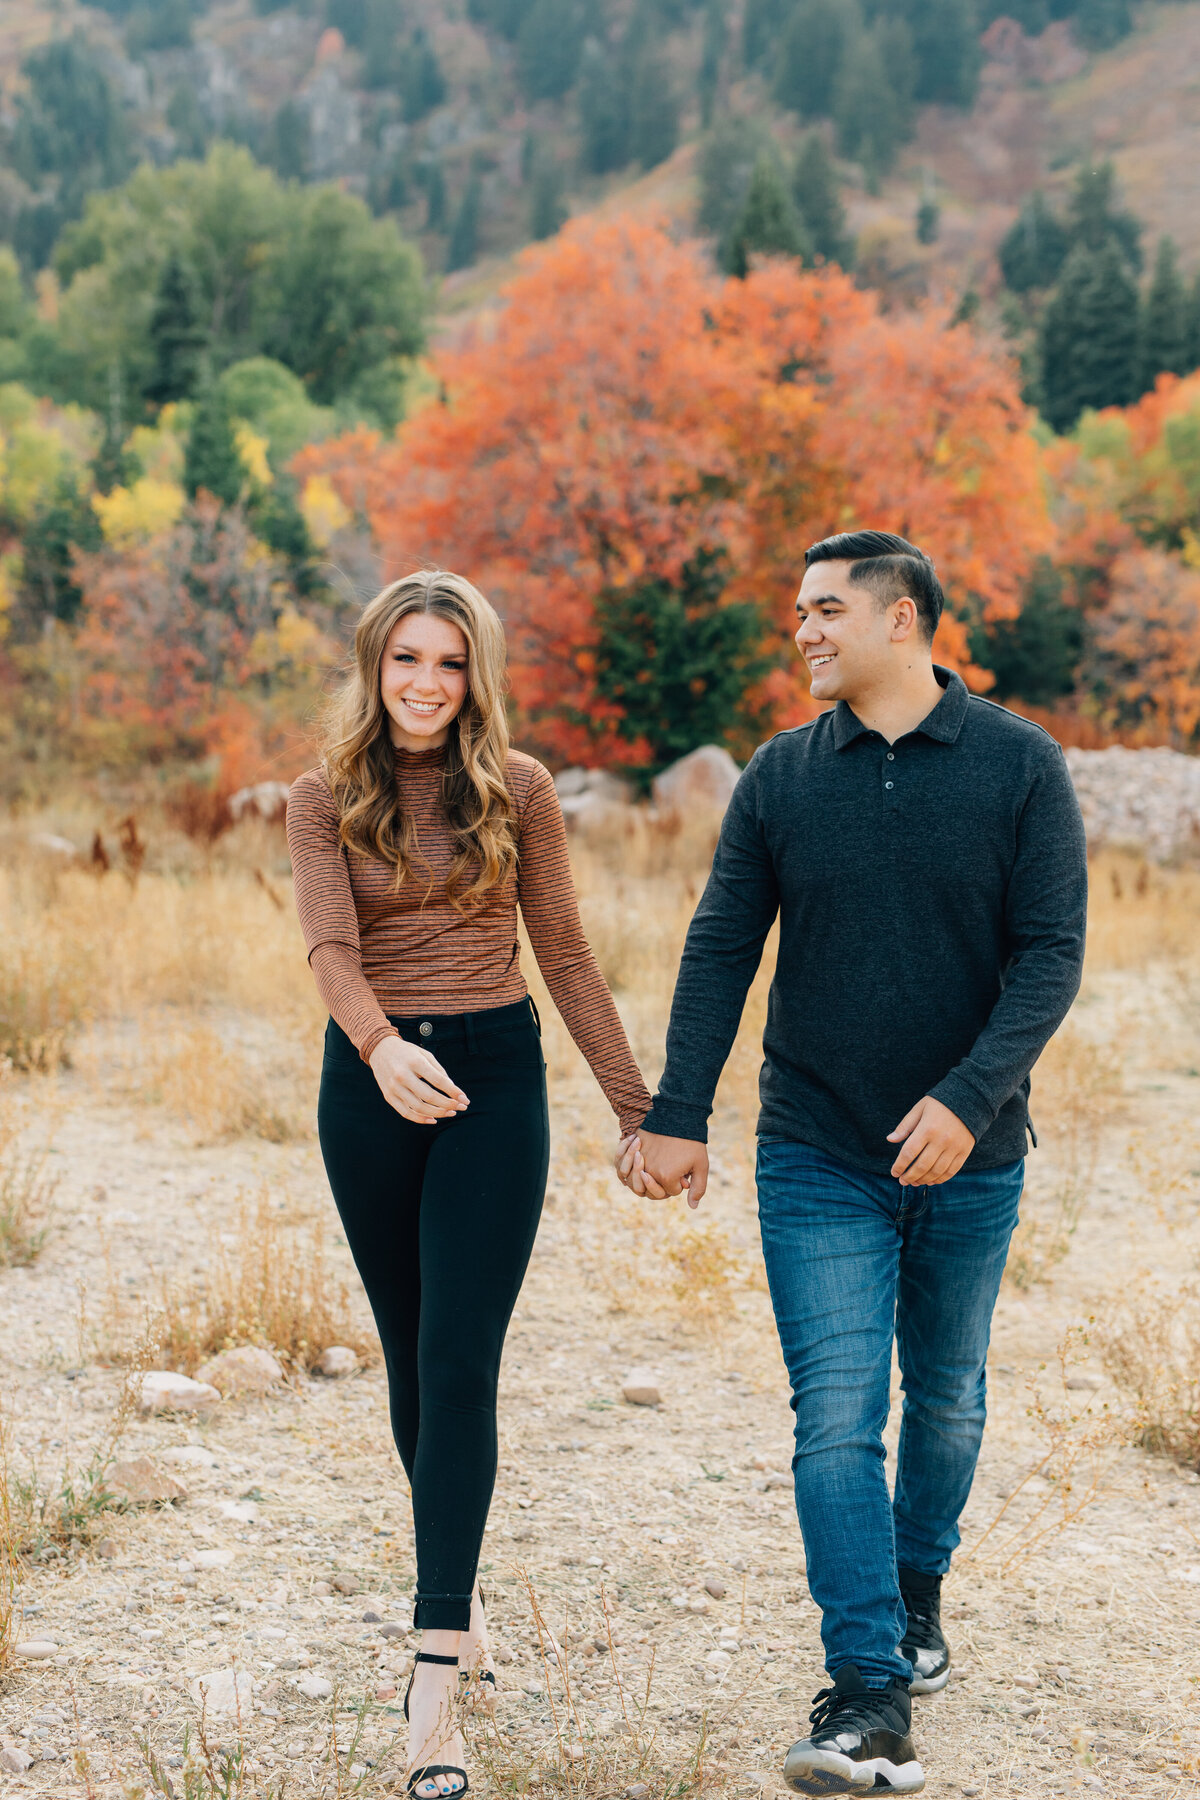 Bright and warm engagement photos